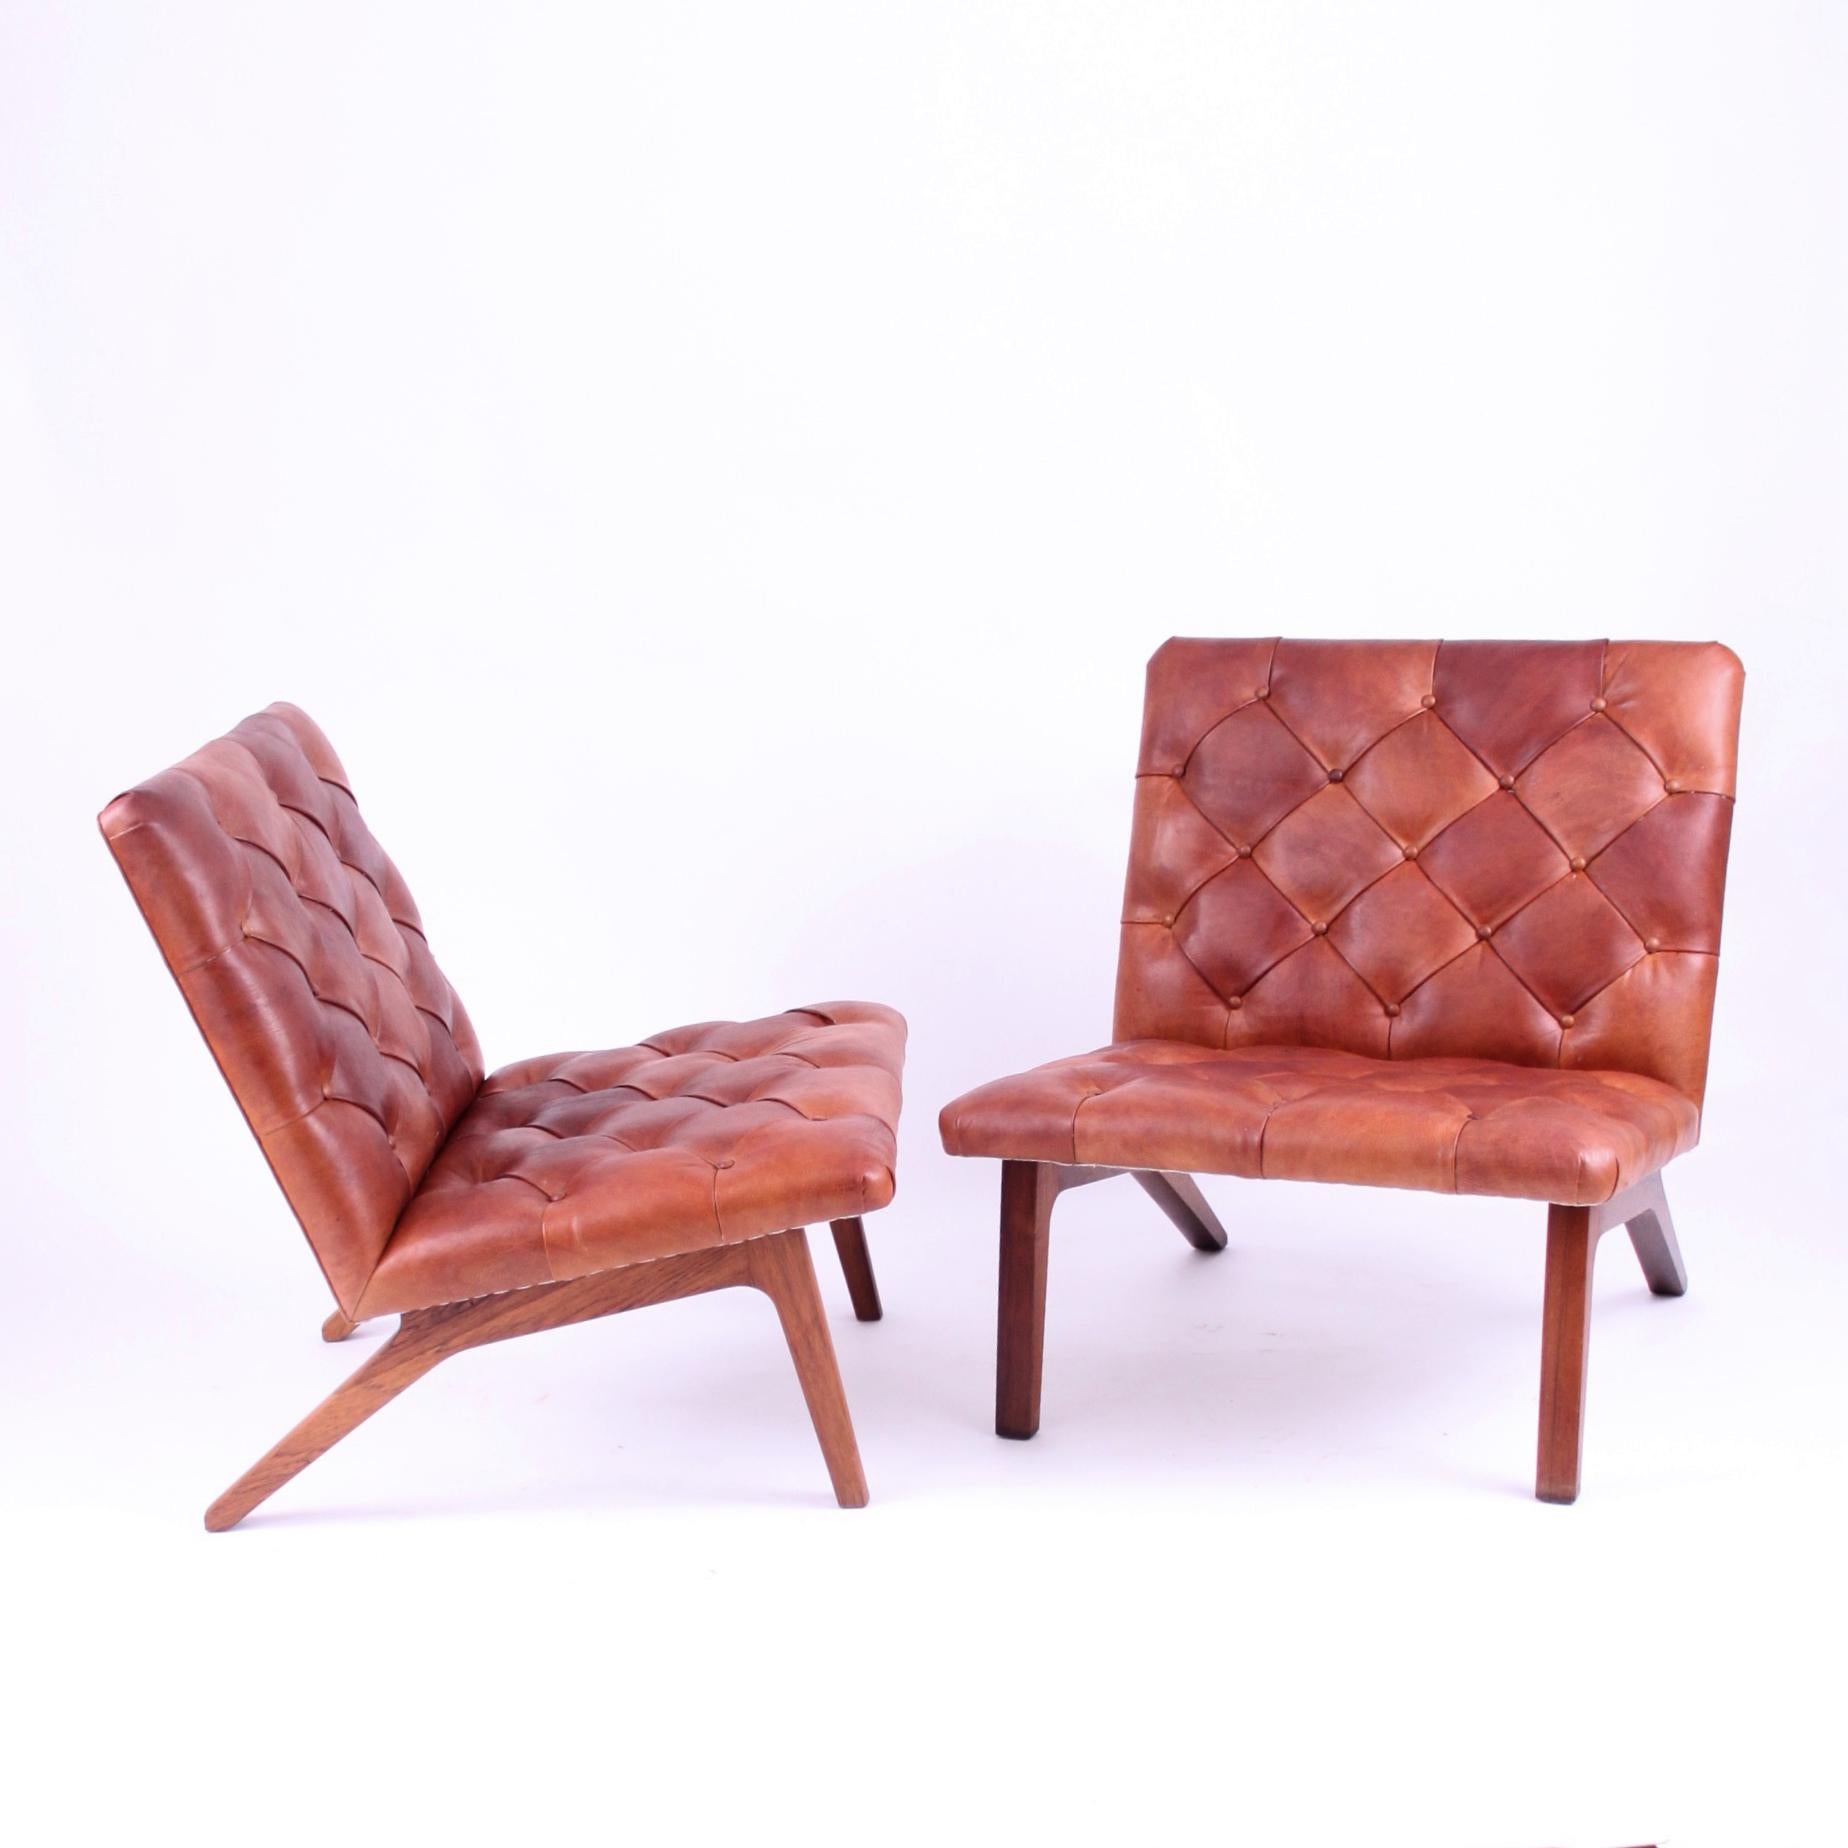 Oiled Pair of Lounge Chairs, Helge Vestergaard Jensen, Rosewood and Niger Leather 1966